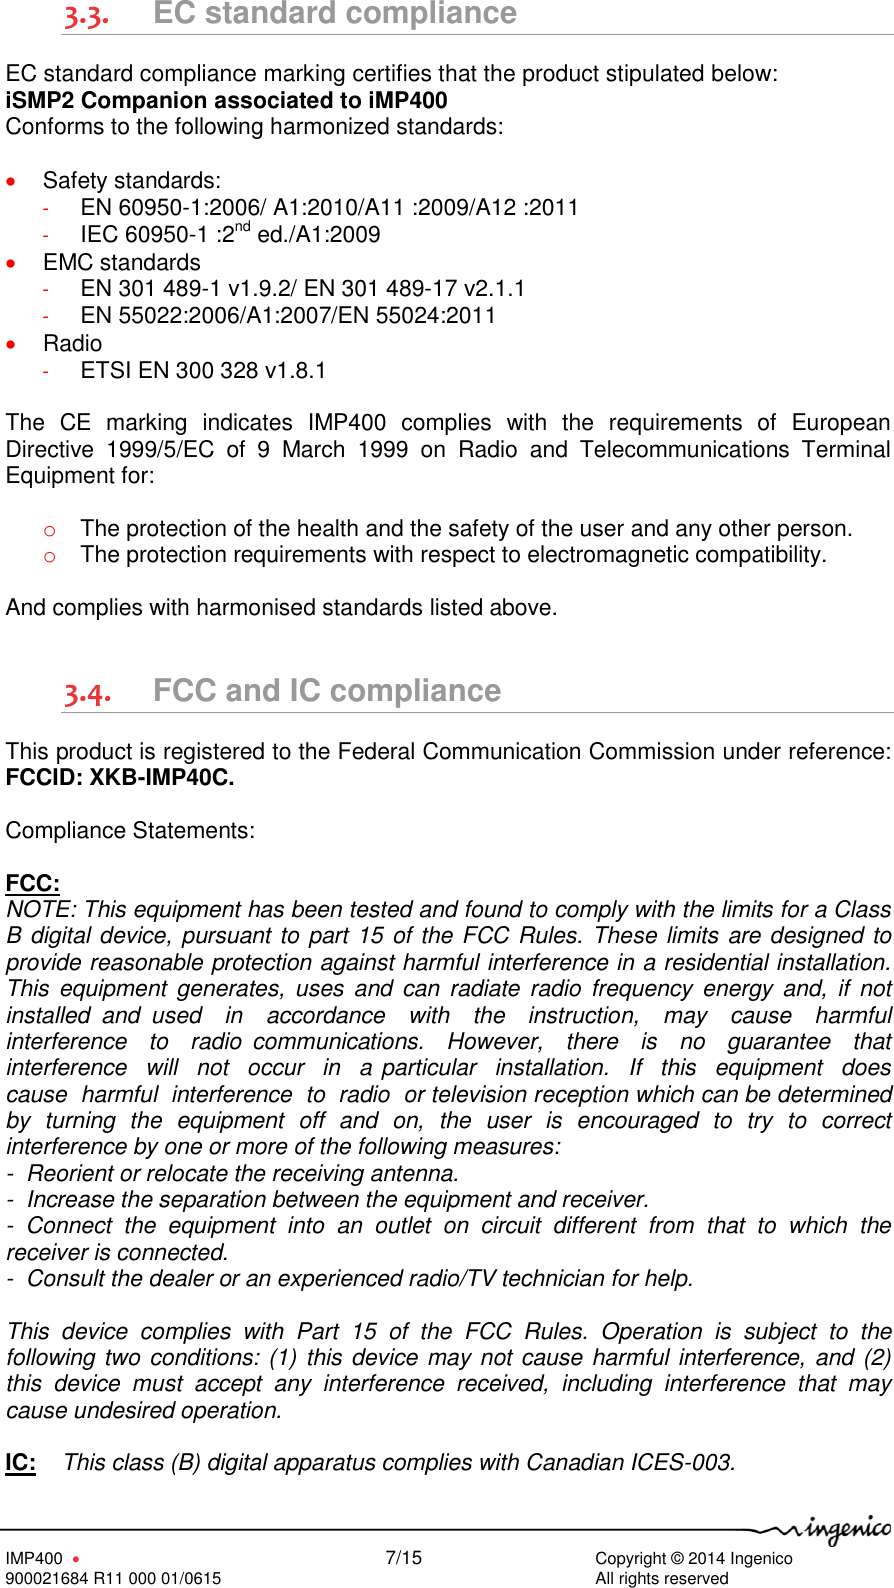   IMP400      7/15     Copyright © 2014 Ingenico 900021684 R11 000 01/0615        All rights reserved  3.3. EC standard compliance EC standard compliance marking certifies that the product stipulated below:  iSMP2 Companion associated to iMP400 Conforms to the following harmonized standards:   Safety standards: - EN 60950-1:2006/ A1:2010/A11 :2009/A12 :2011 - IEC 60950-1 :2nd ed./A1:2009  EMC standards - EN 301 489-1 v1.9.2/ EN 301 489-17 v2.1.1 - EN 55022:2006/A1:2007/EN 55024:2011  Radio - ETSI EN 300 328 v1.8.1  The  CE  marking  indicates  IMP400  complies  with  the  requirements  of  European Directive  1999/5/EC  of  9  March  1999  on  Radio  and  Telecommunications  Terminal Equipment for:  o The protection of the health and the safety of the user and any other person. o The protection requirements with respect to electromagnetic compatibility.  And complies with harmonised standards listed above.  3.4. FCC and IC compliance This product is registered to the Federal Communication Commission under reference: FCCID: XKB-IMP40C.  Compliance Statements:  FCC: NOTE: This equipment has been tested and found to comply with the limits for a Class B digital device, pursuant to part 15 of the FCC Rules. These limits are designed to provide reasonable protection against harmful interference in a residential installation.  This  equipment  generates,  uses  and  can  radiate  radio  frequency  energy  and,  if  not installed  and  used    in    accordance    with    the    instruction,    may    cause    harmful  interference    to    radio  communications.    However,    there    is    no    guarantee    that  interference  will  not  occur  in  a particular  installation.  If  this  equipment  does  cause  harmful  interference  to  radio  or television reception which can be determined by  turning  the  equipment  off  and  on,  the  user  is  encouraged  to  try  to  correct interference by one or more of the following measures:  -  Reorient or relocate the receiving antenna.  -  Increase the separation between the equipment and receiver.  -  Connect  the  equipment  into  an  outlet  on  circuit  different  from  that  to  which  the receiver is connected.  -  Consult the dealer or an experienced radio/TV technician for help.  This  device  complies  with  Part  15  of  the  FCC  Rules.  Operation  is  subject  to  the following two conditions: (1) this device may not cause harmful interference, and (2) this  device  must  accept  any  interference  received,  including  interference  that  may cause undesired operation.  IC:    This class (B) digital apparatus complies with Canadian ICES-003. 